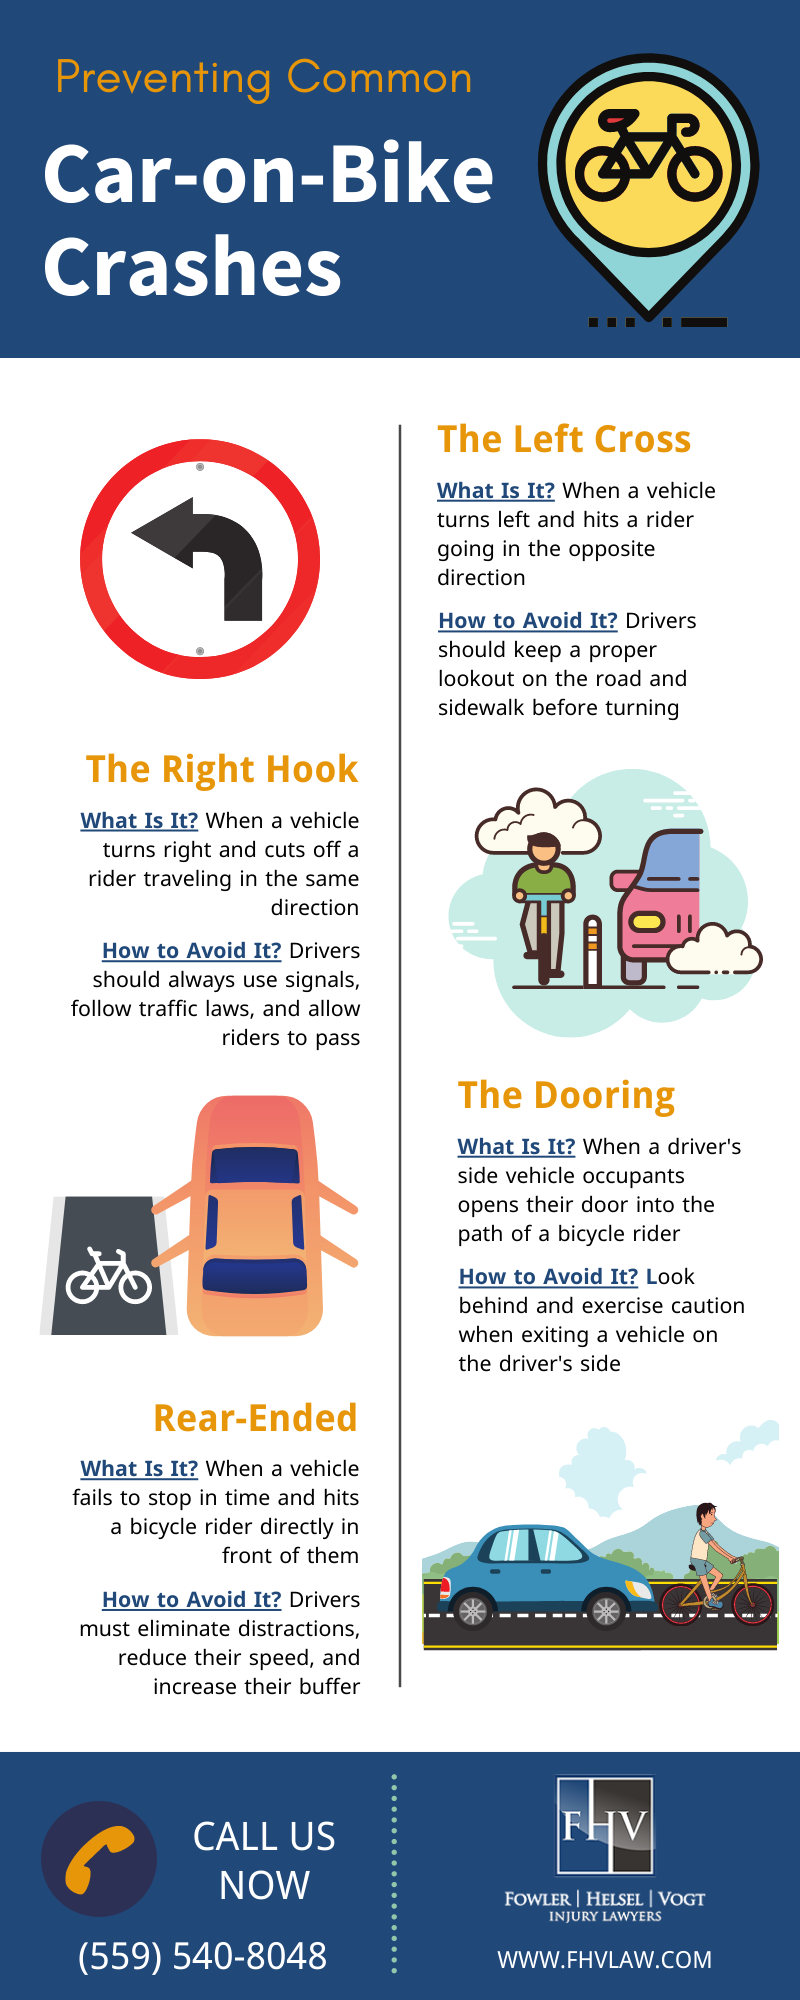 Infographic on preventing common car-on-bike crashes